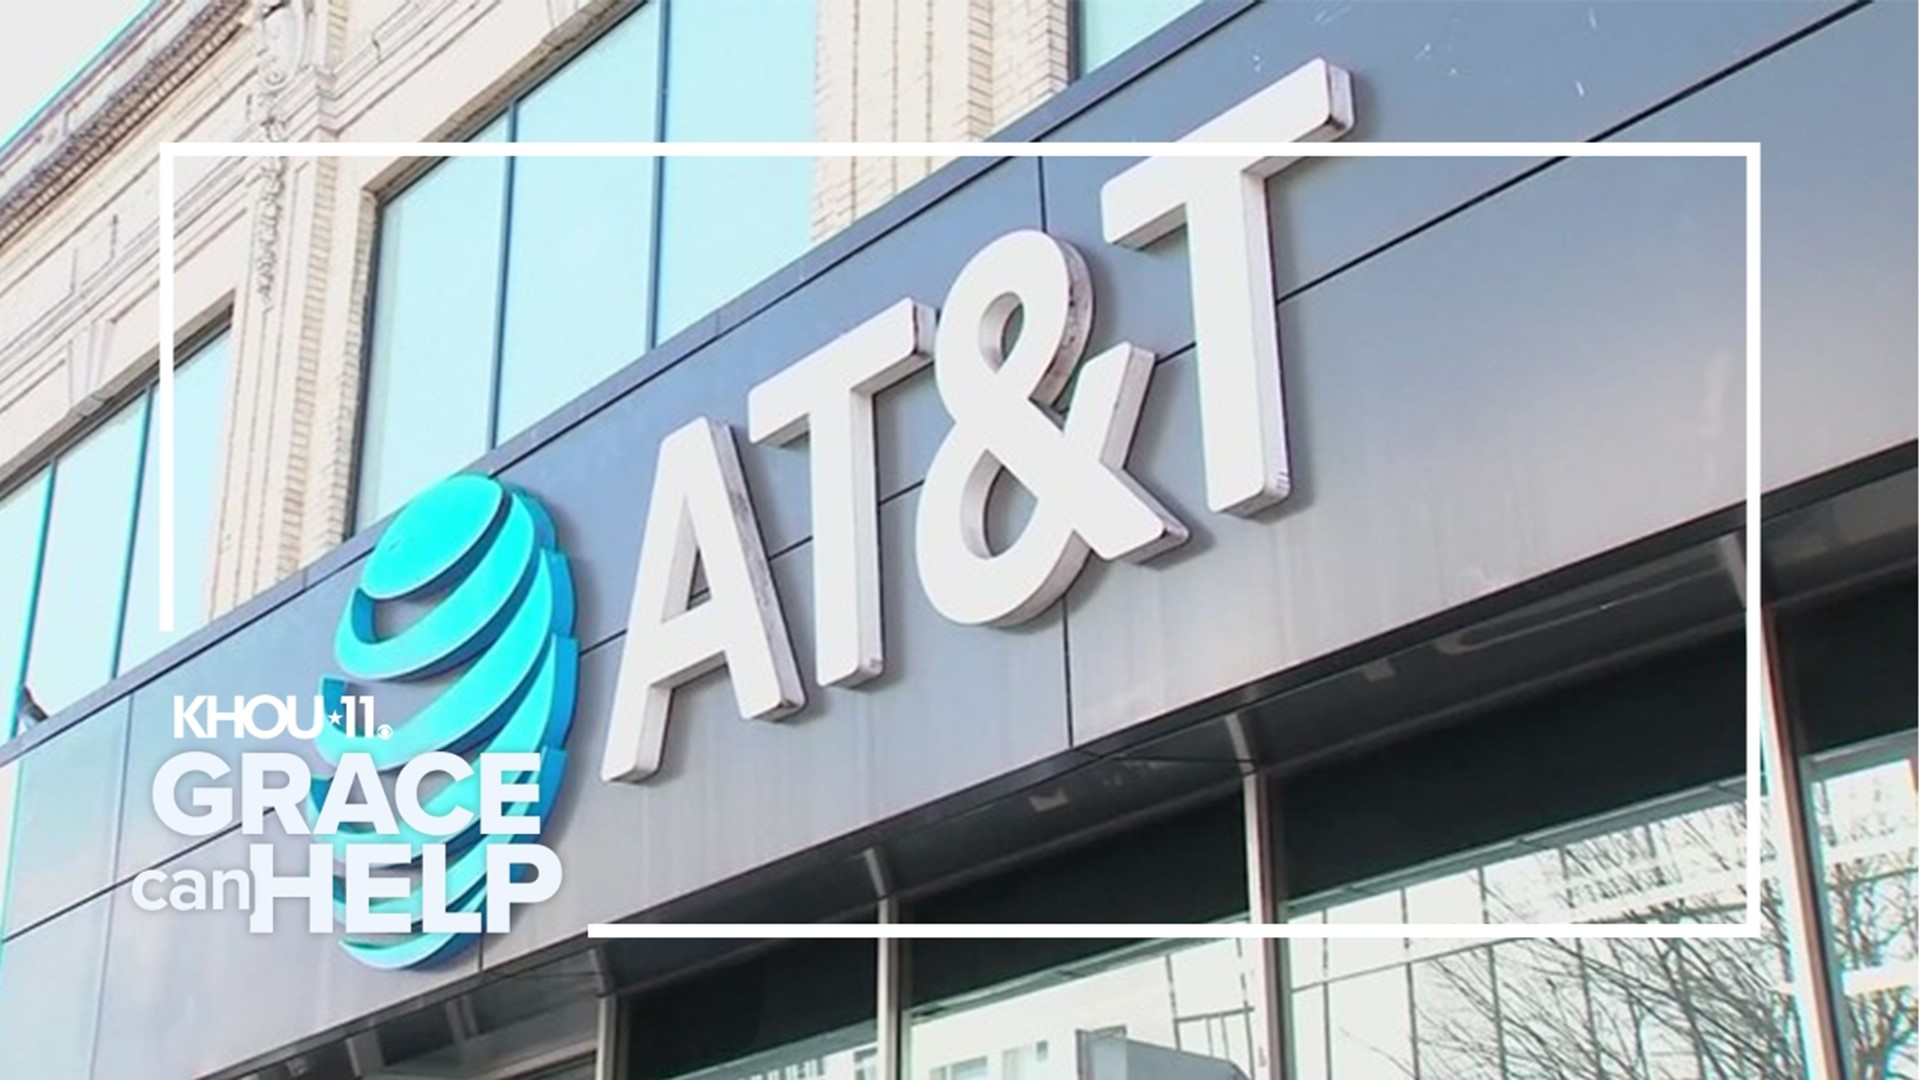 According to AT&T, 7.6 million current customers and 65.4 million former account holders are impacted.